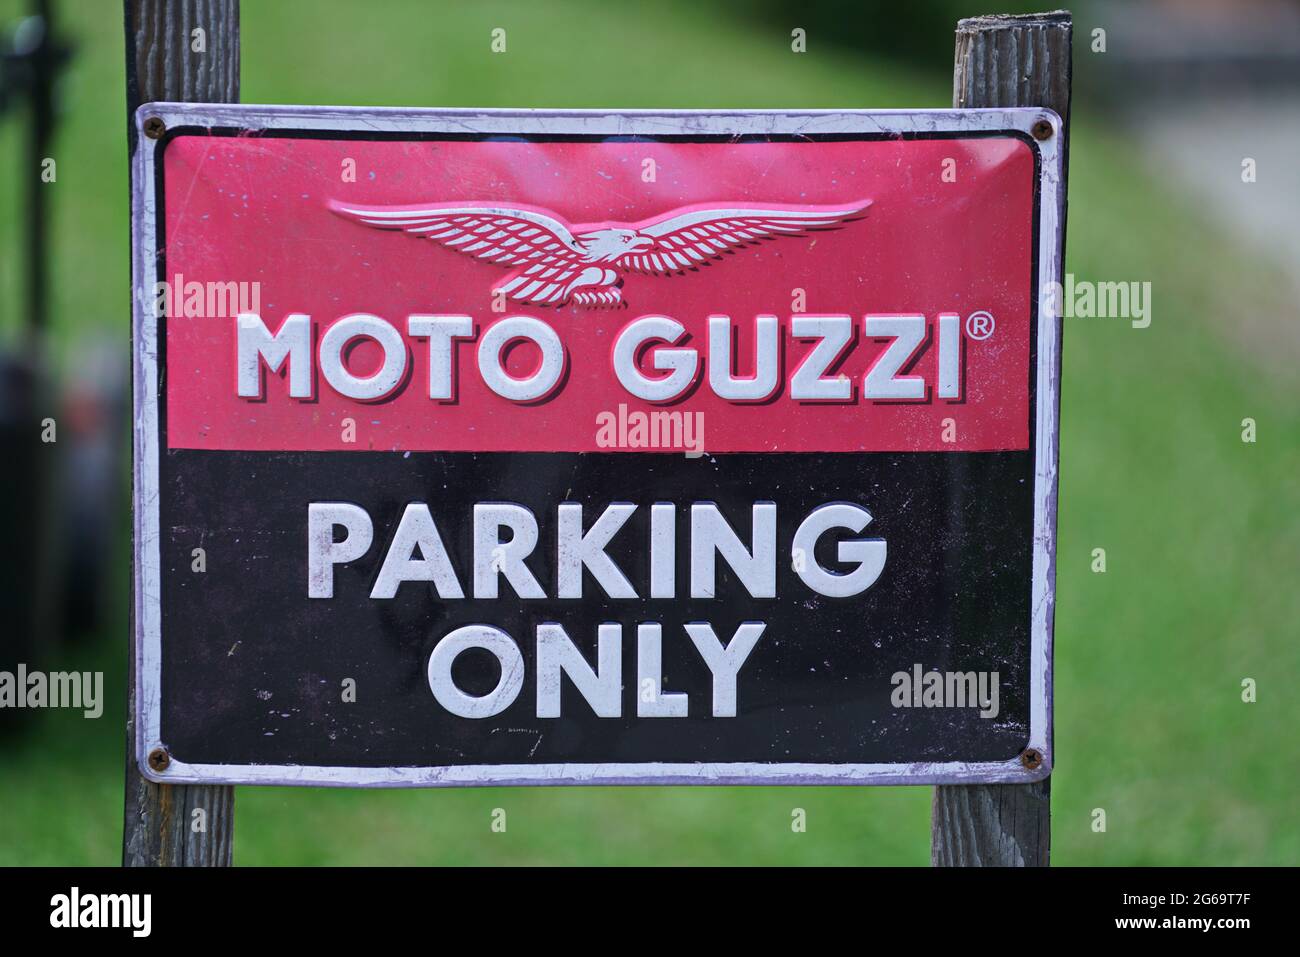 Close Up of Moto Guzzi motorcycle Parking Only Sign. Milan, Italy - July 2021 Stock Photo